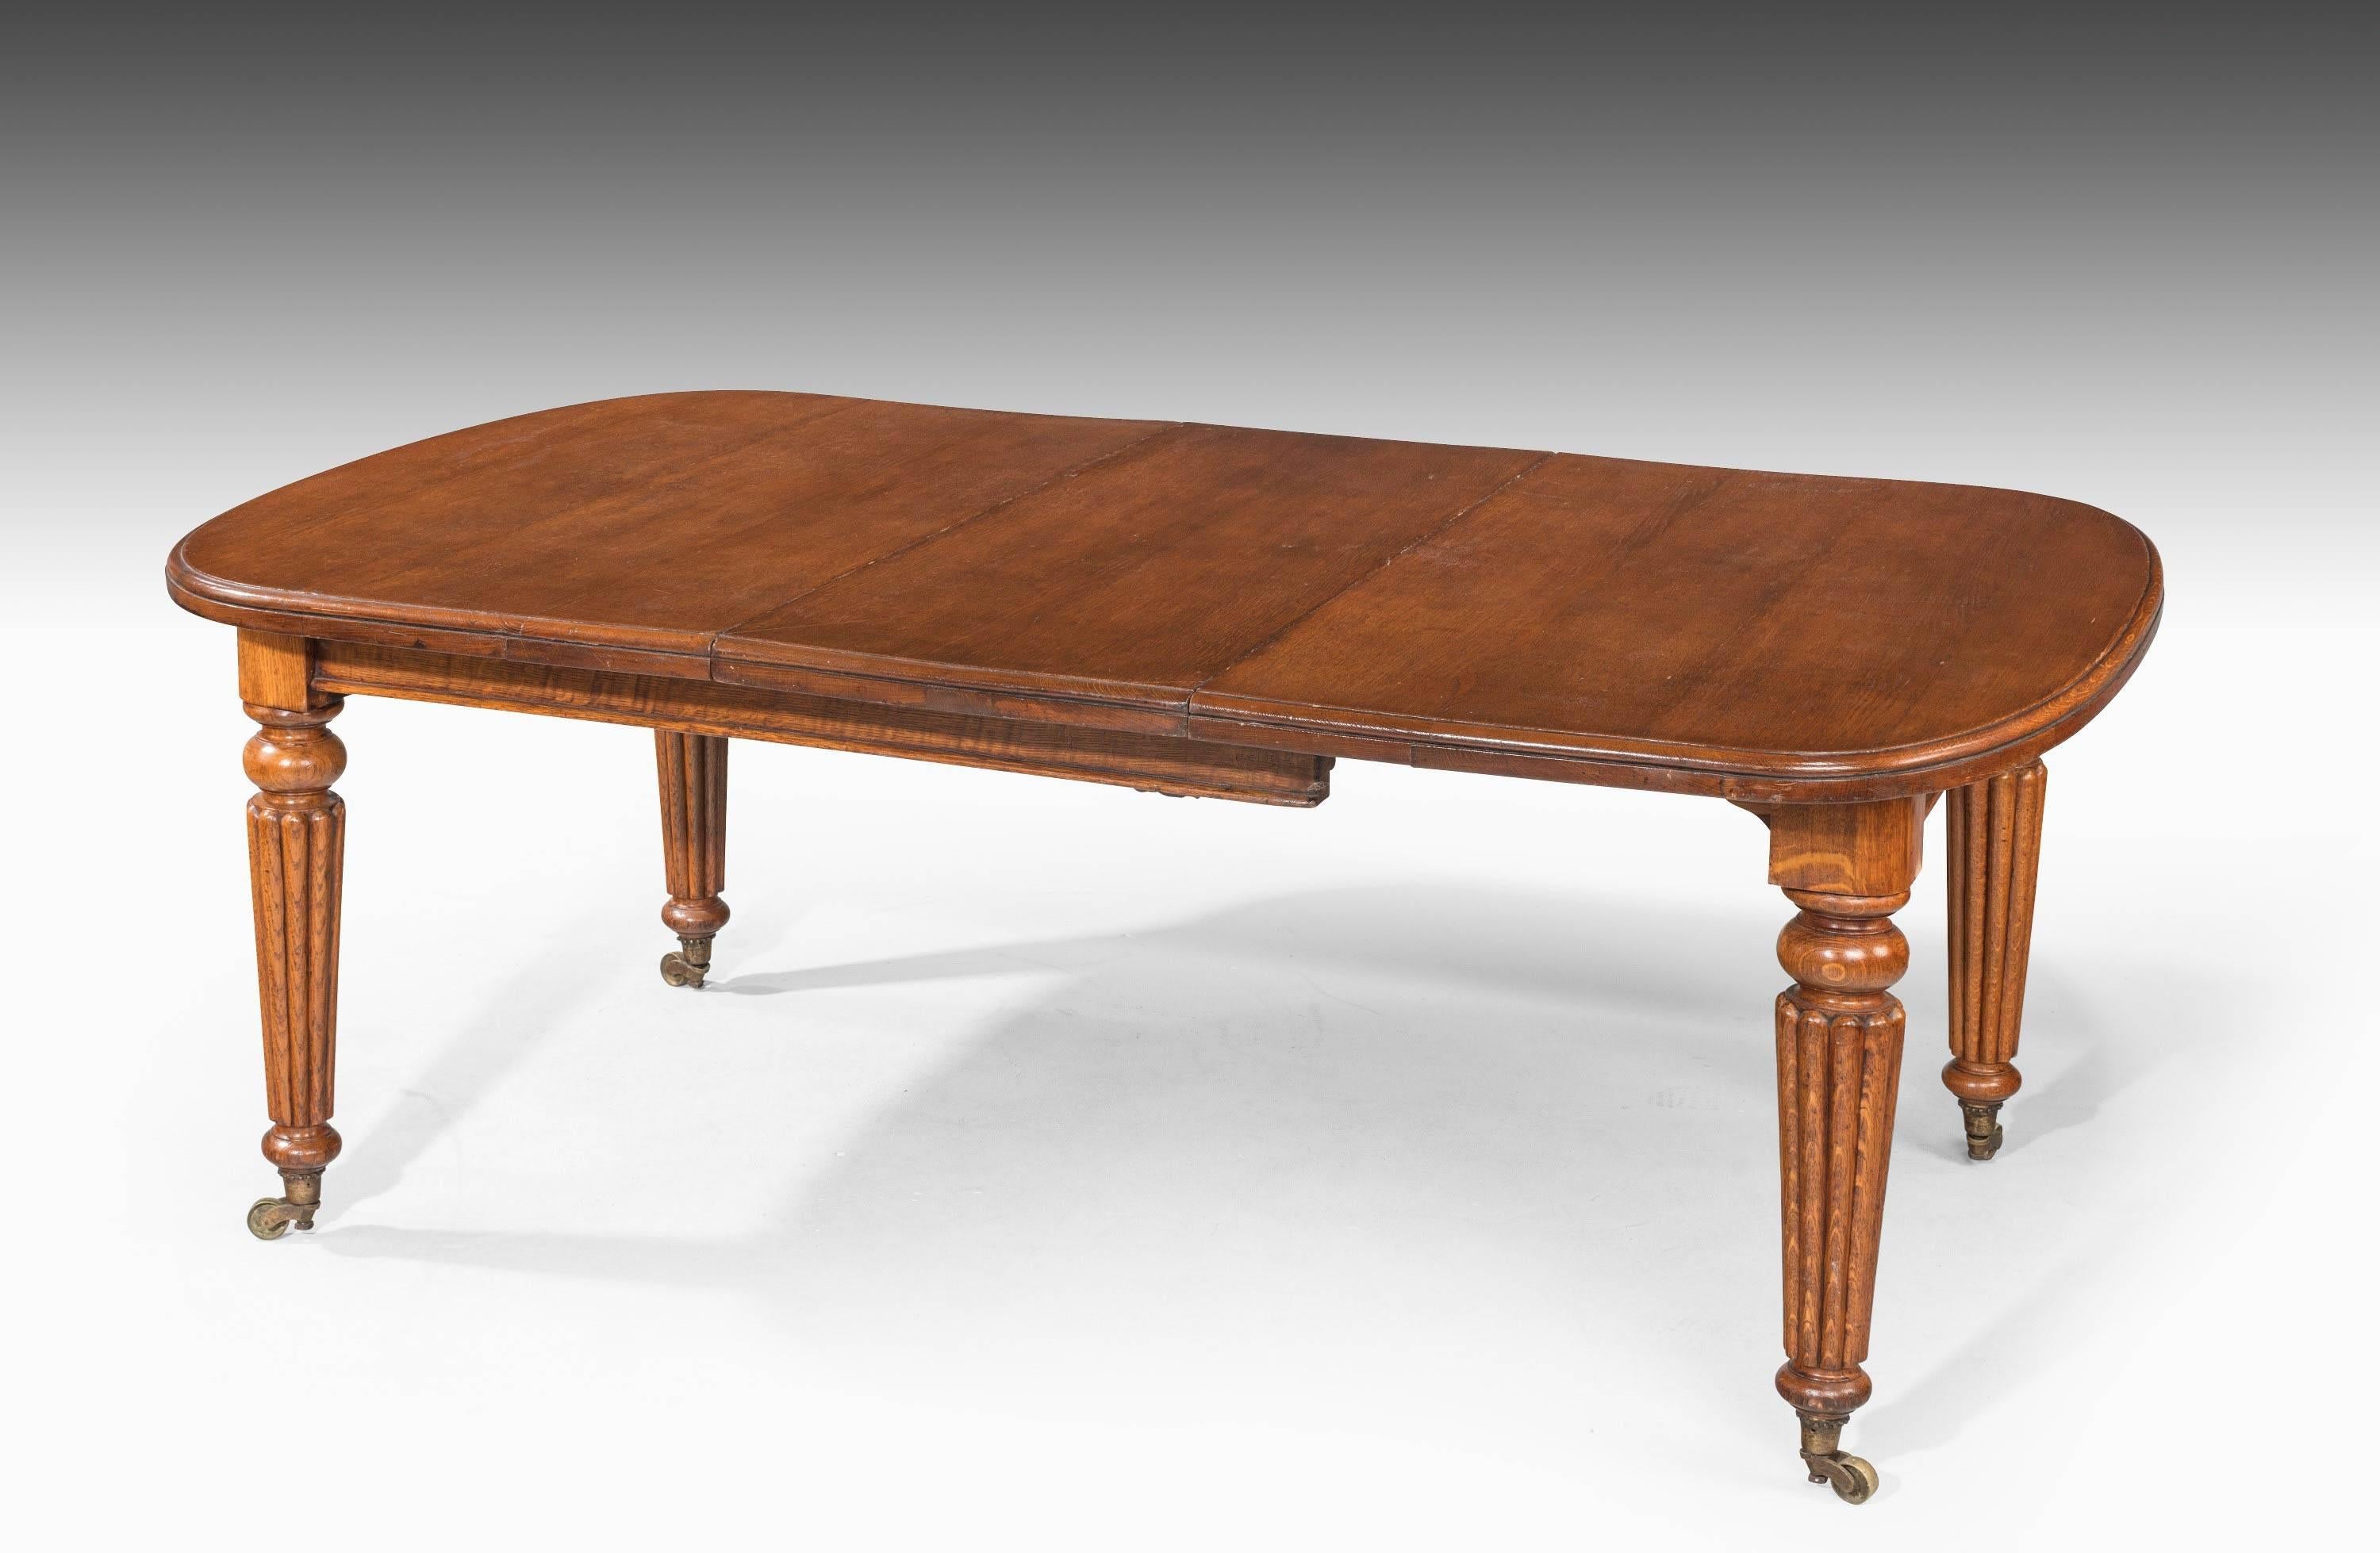 Late Regency Period Mahogany Extending Dining Table with Reeded Decoration 3